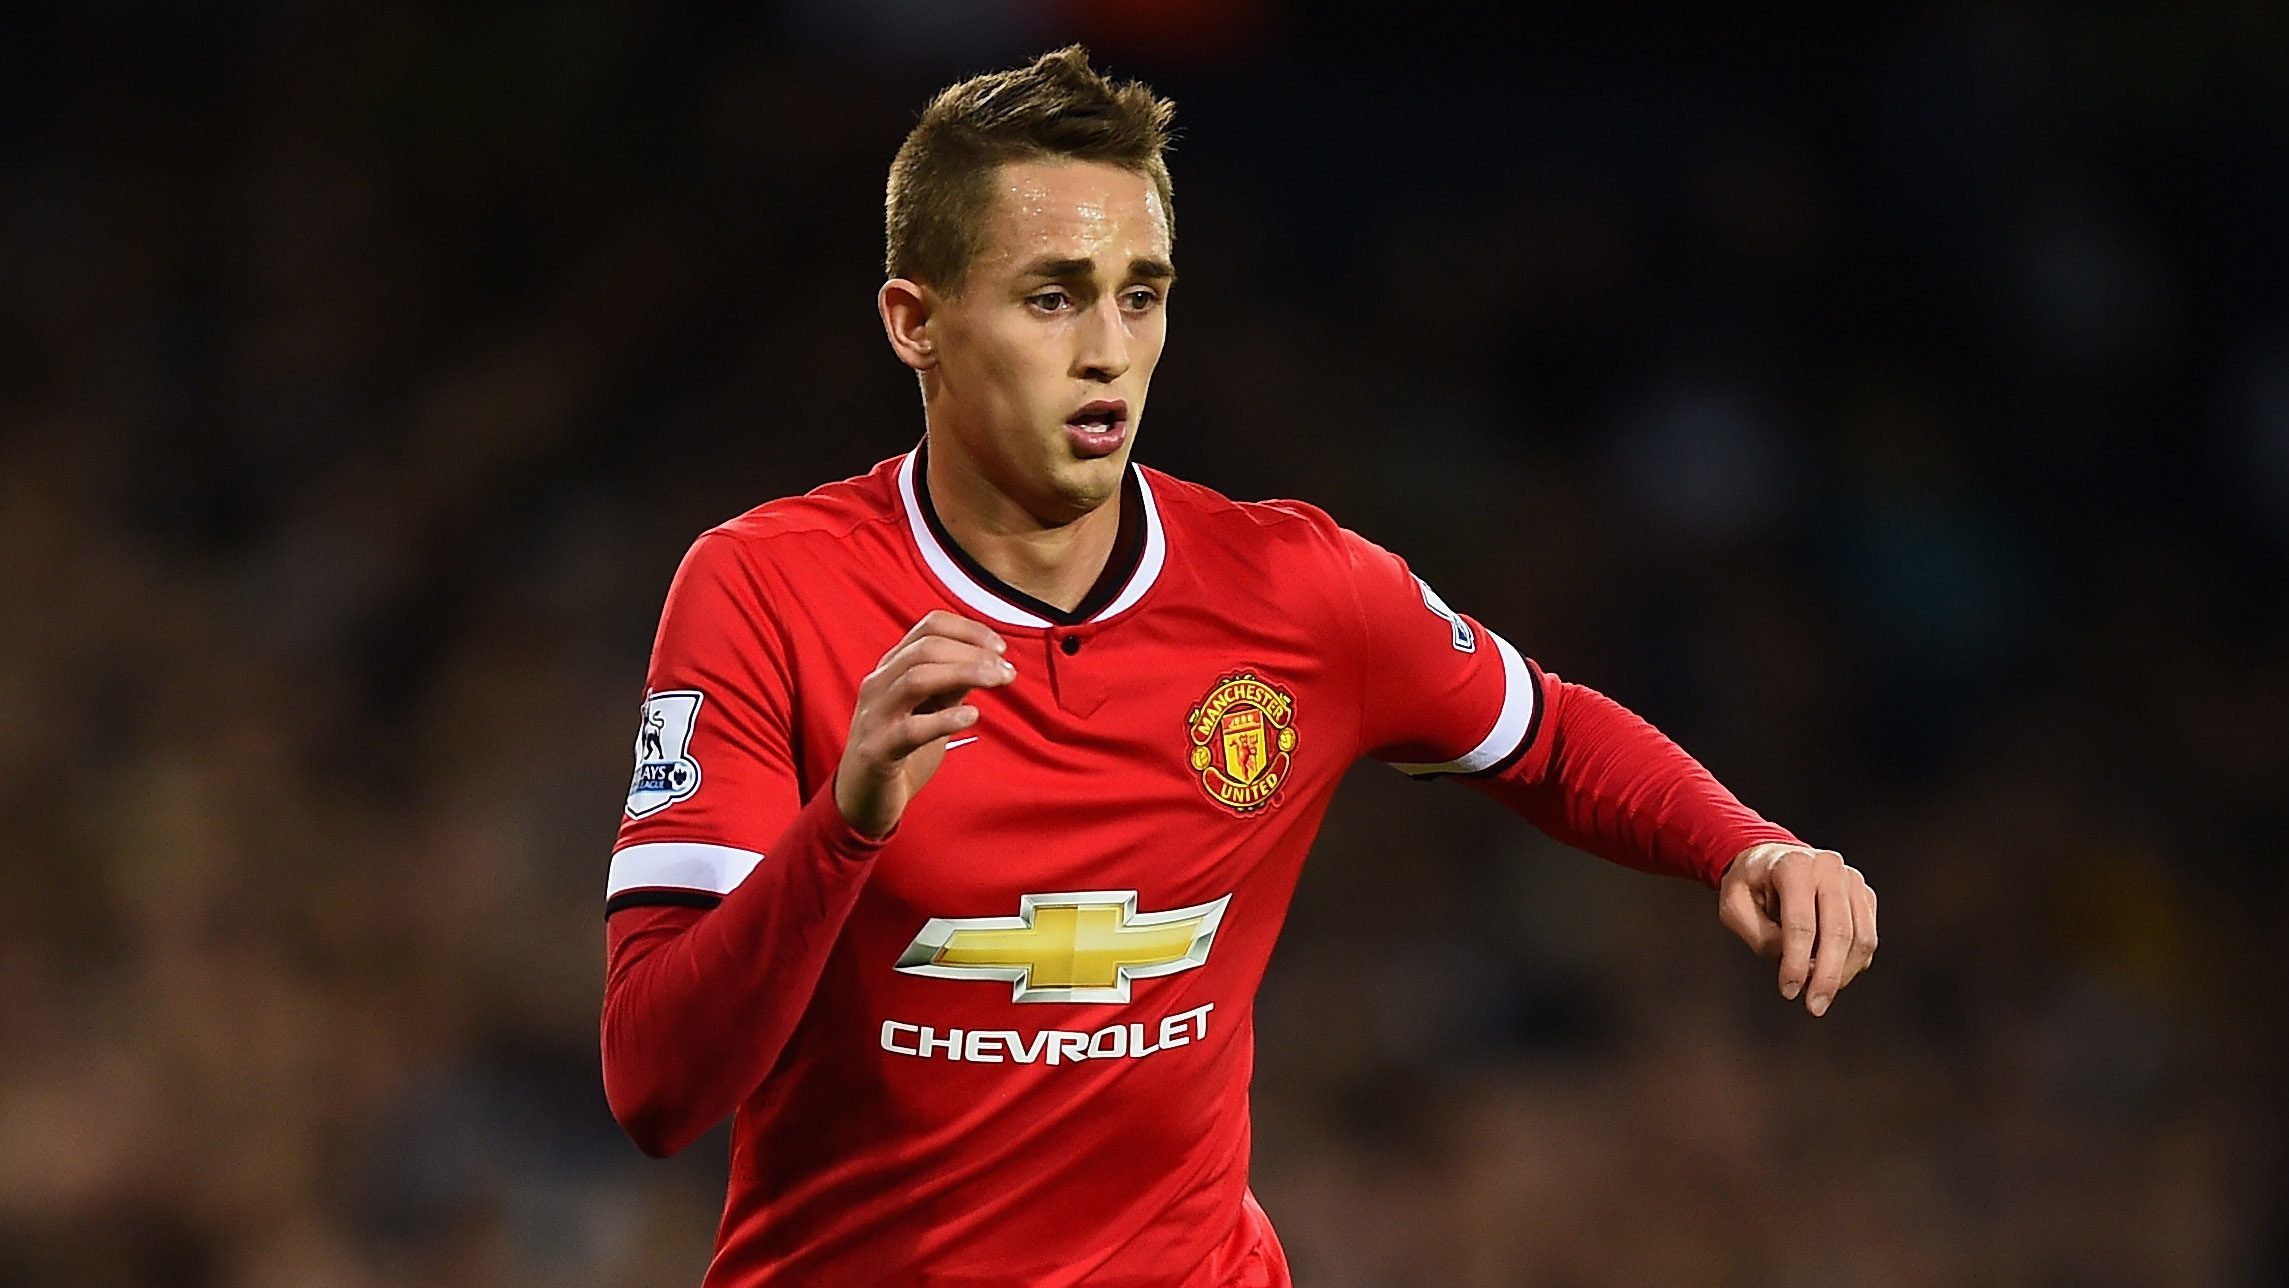 Adnan Januzaj of Manchester United (Laurence Griffiths/Getty Images)